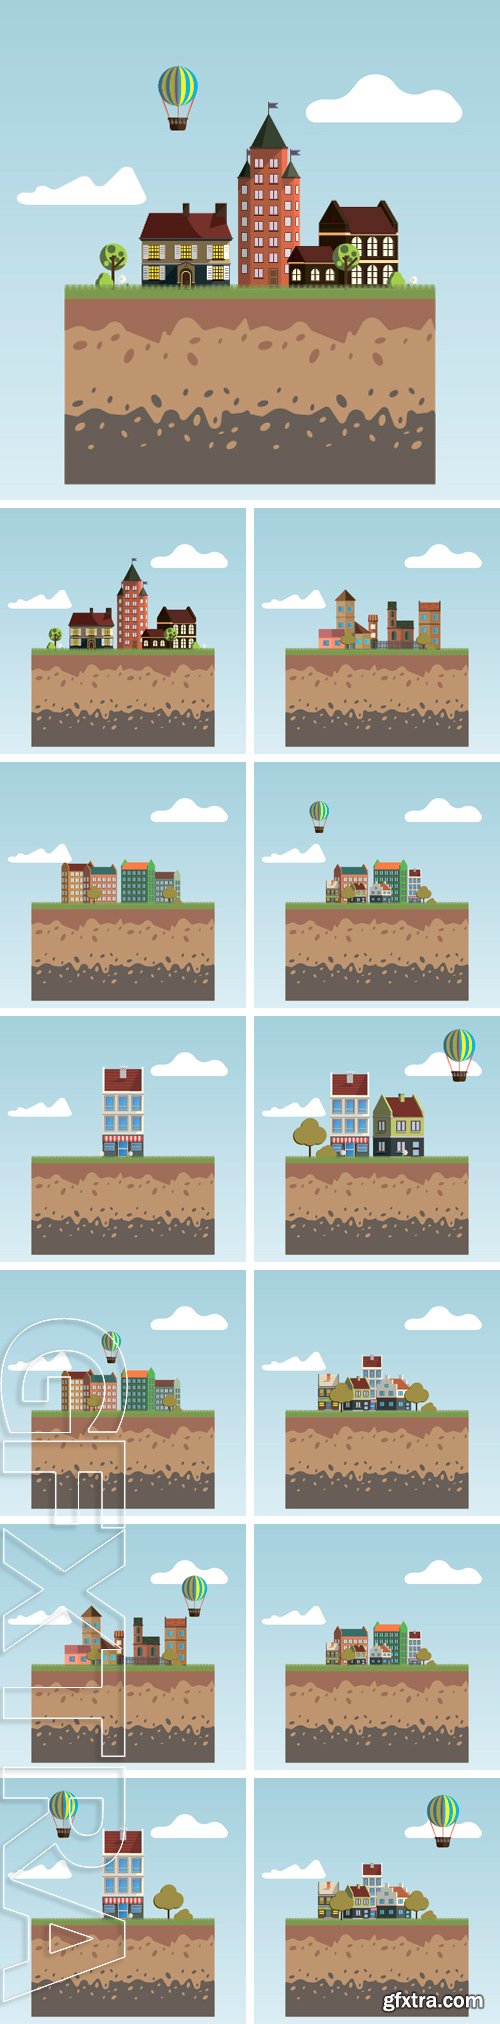 Stock Vectors - Flat design modern illustration icon of urban landscape and city life. Building icon